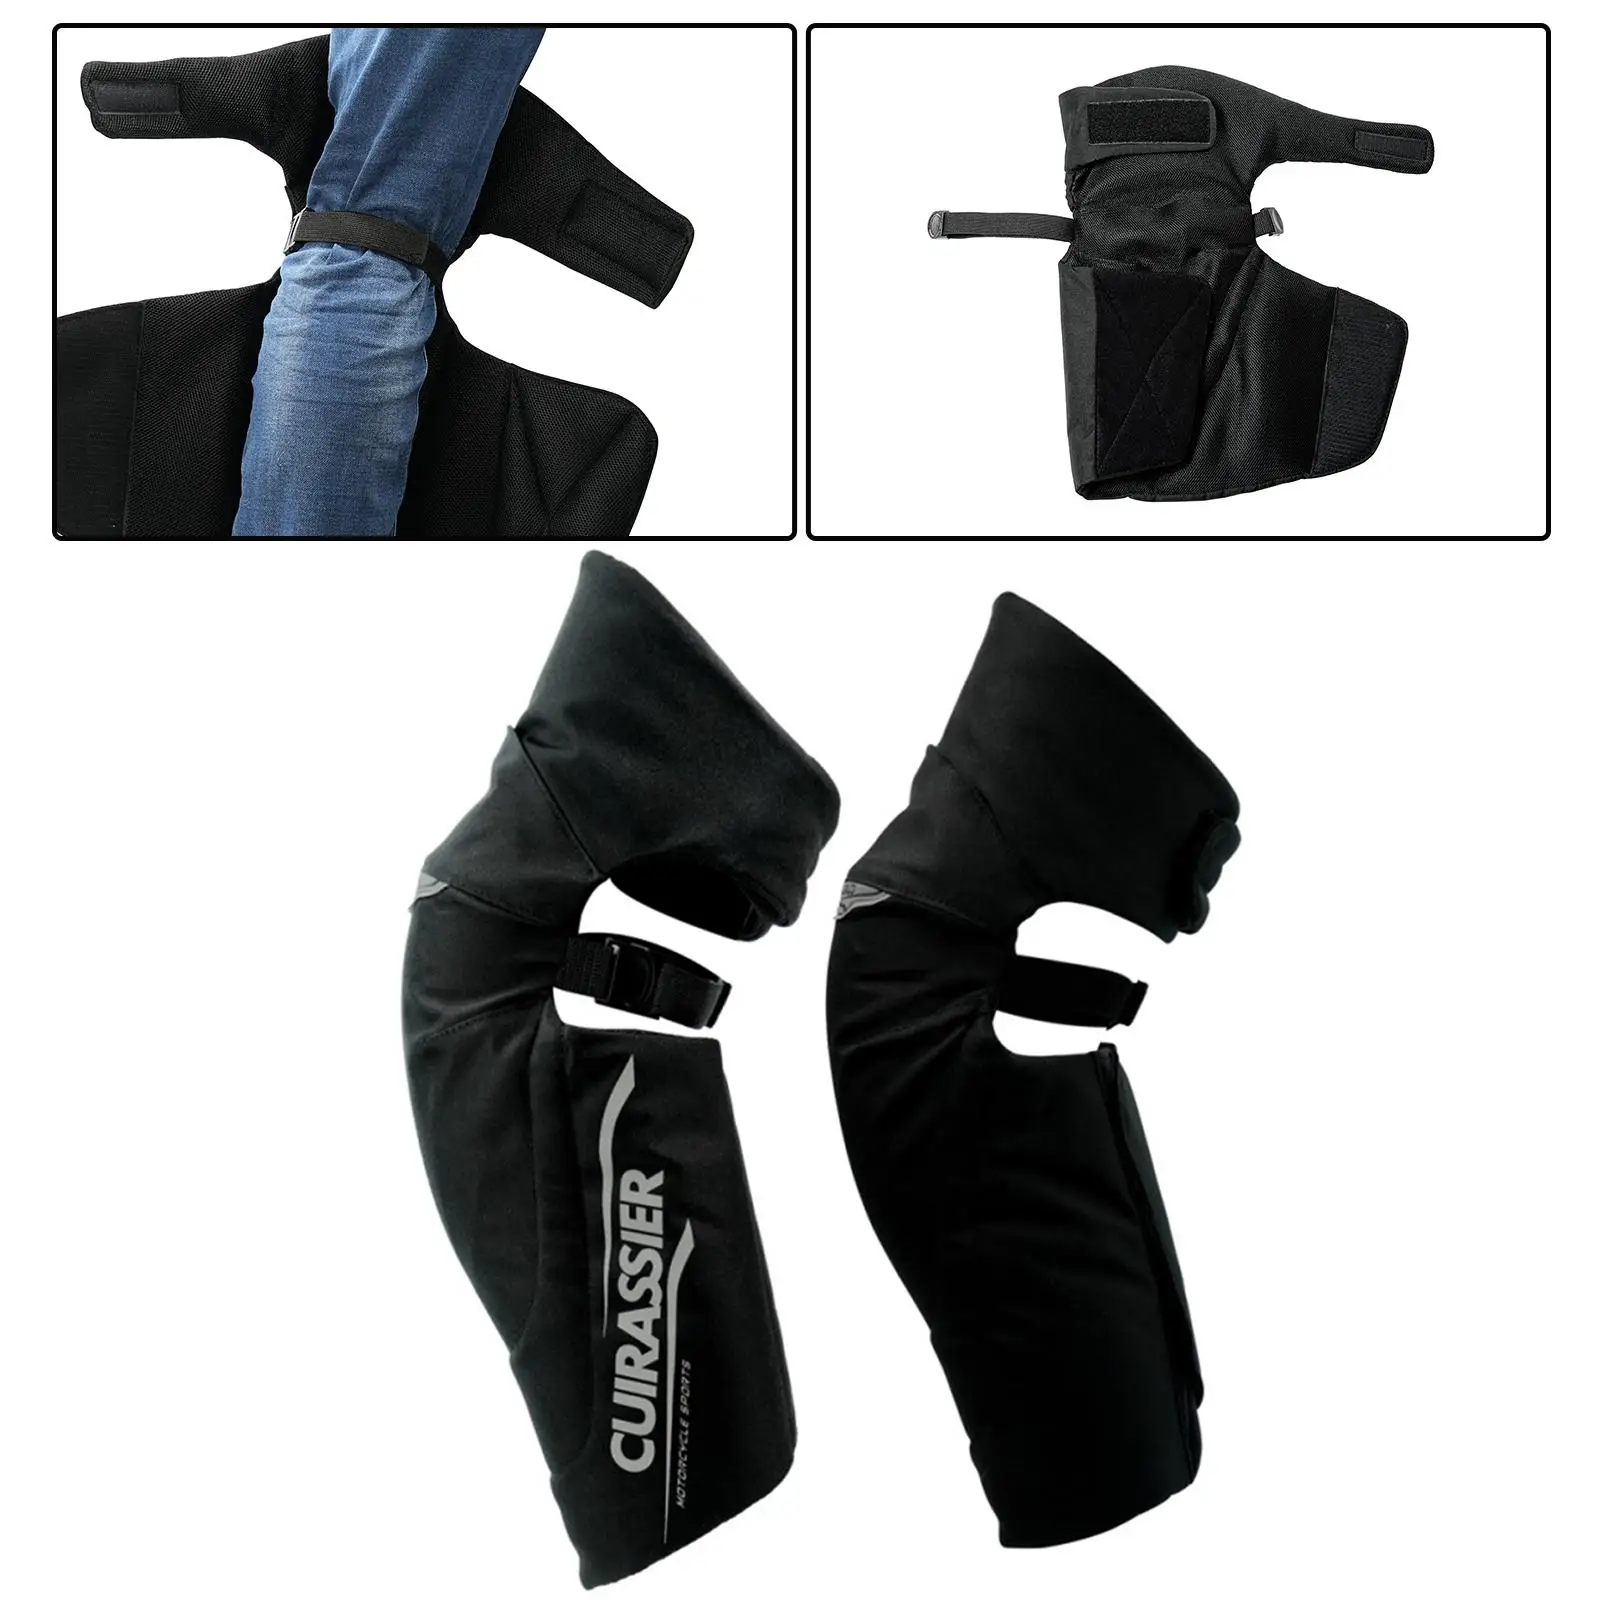 Motorcycle Knee Pads Guards Protective Gear Leggings Covers Fit for Cycling